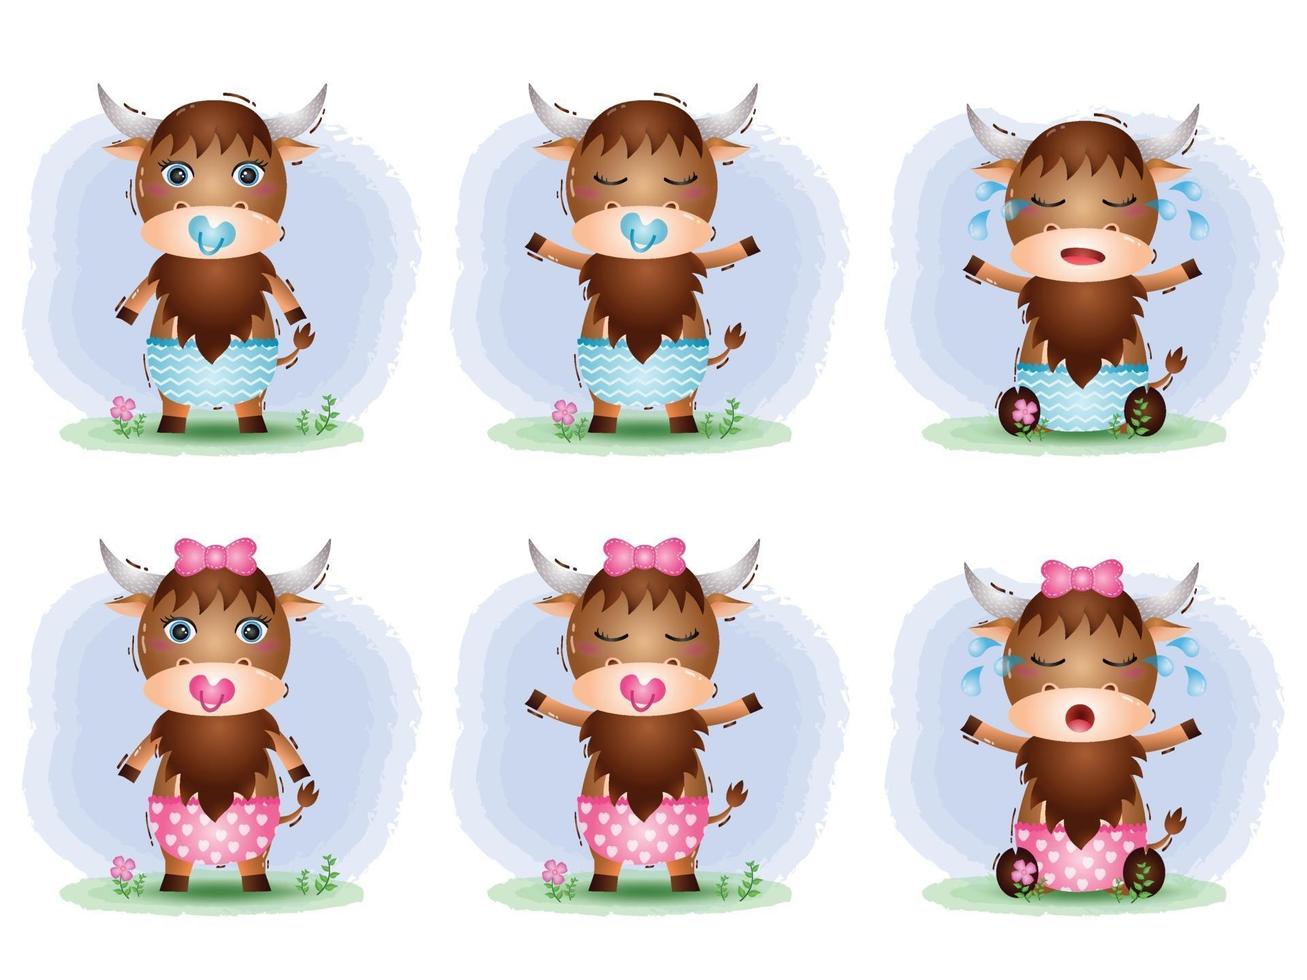 cute baby Yak collection in the children's style vector